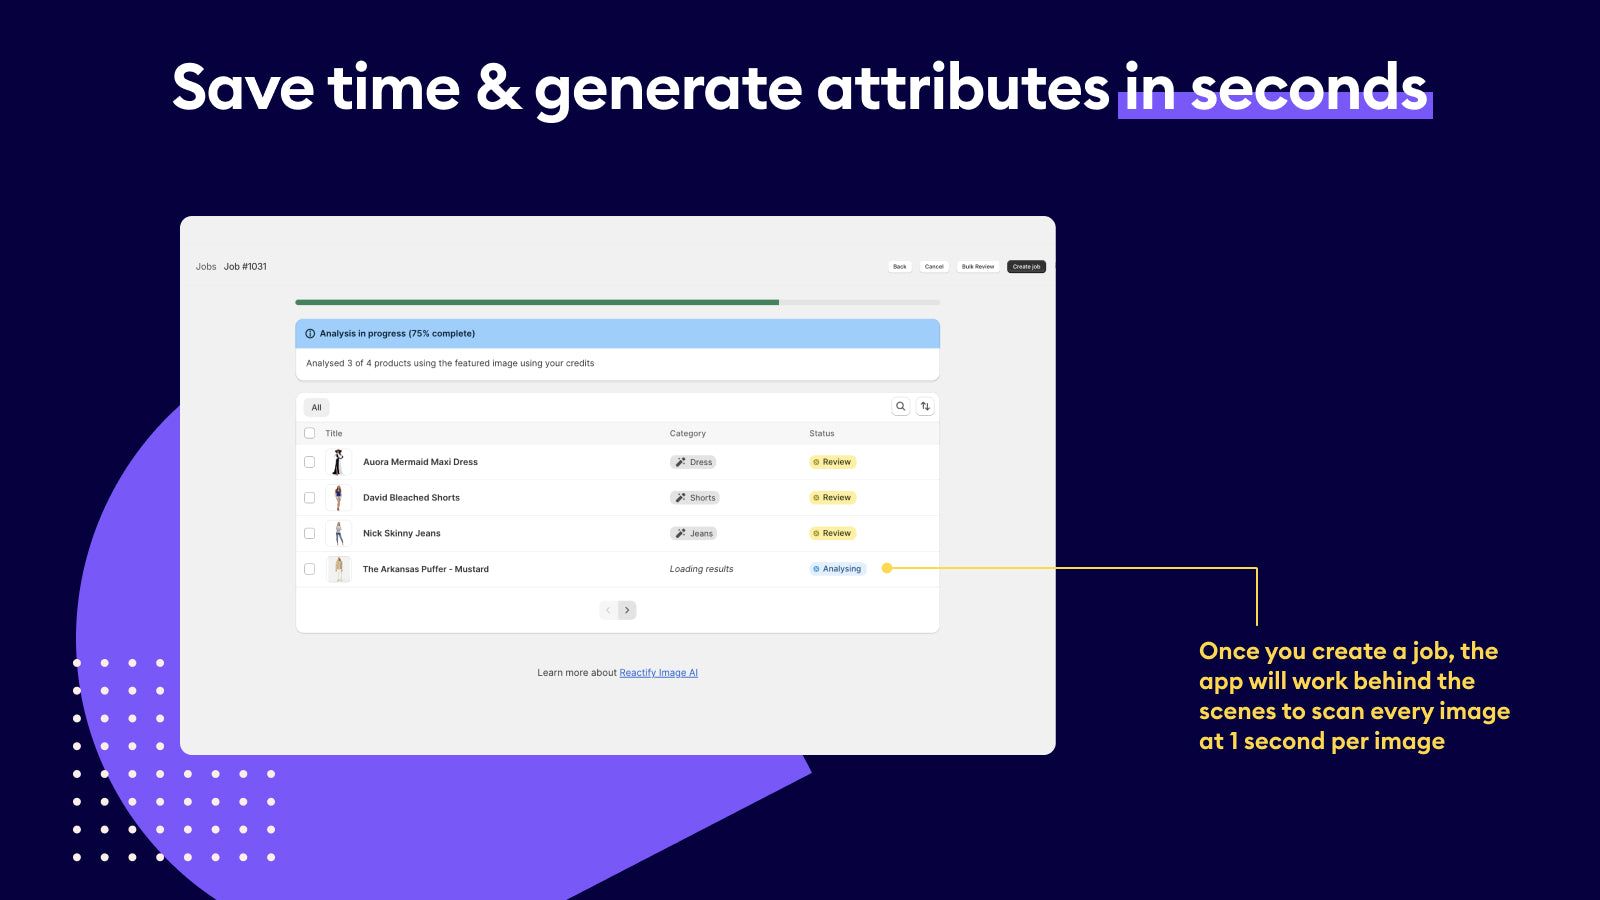 Save time & generate attributes in no-time